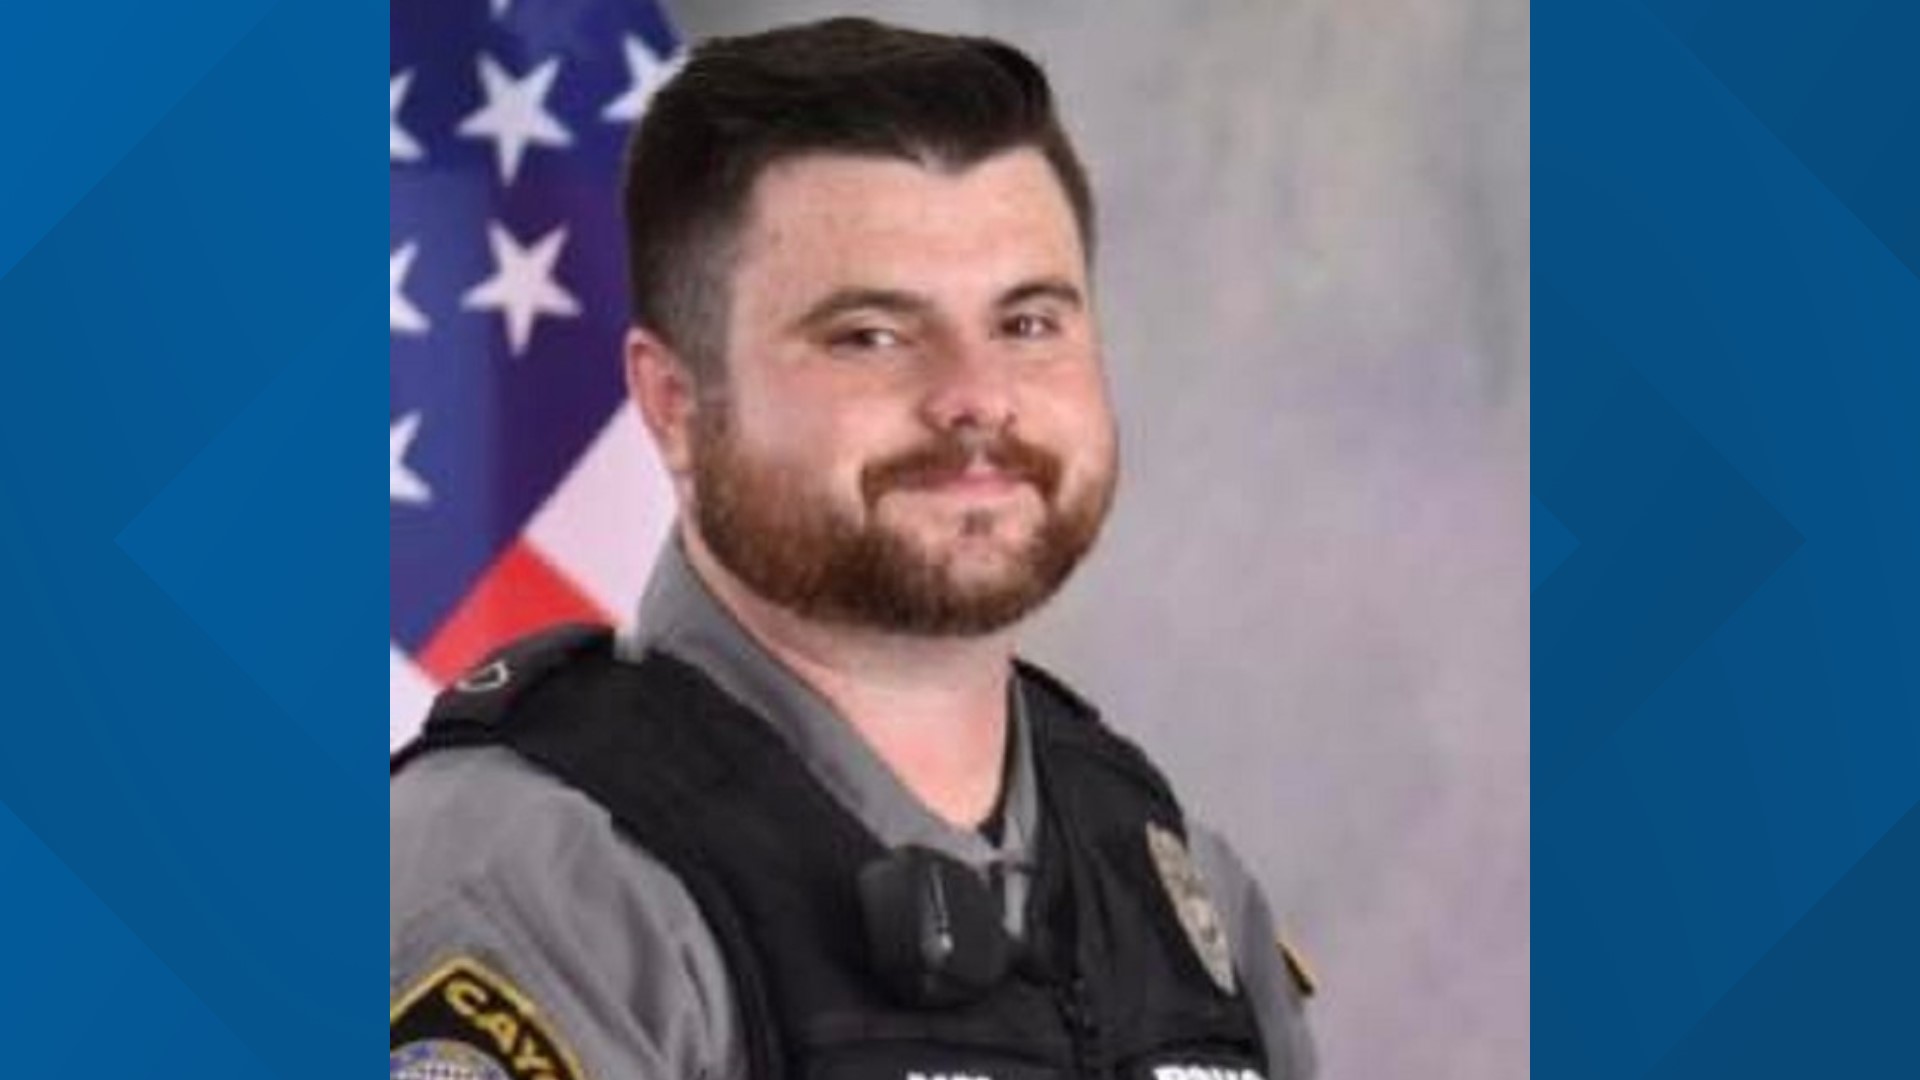 Officer Drew Barr was killed by a suspect early Sunday morning in Cayce, South Carolina.